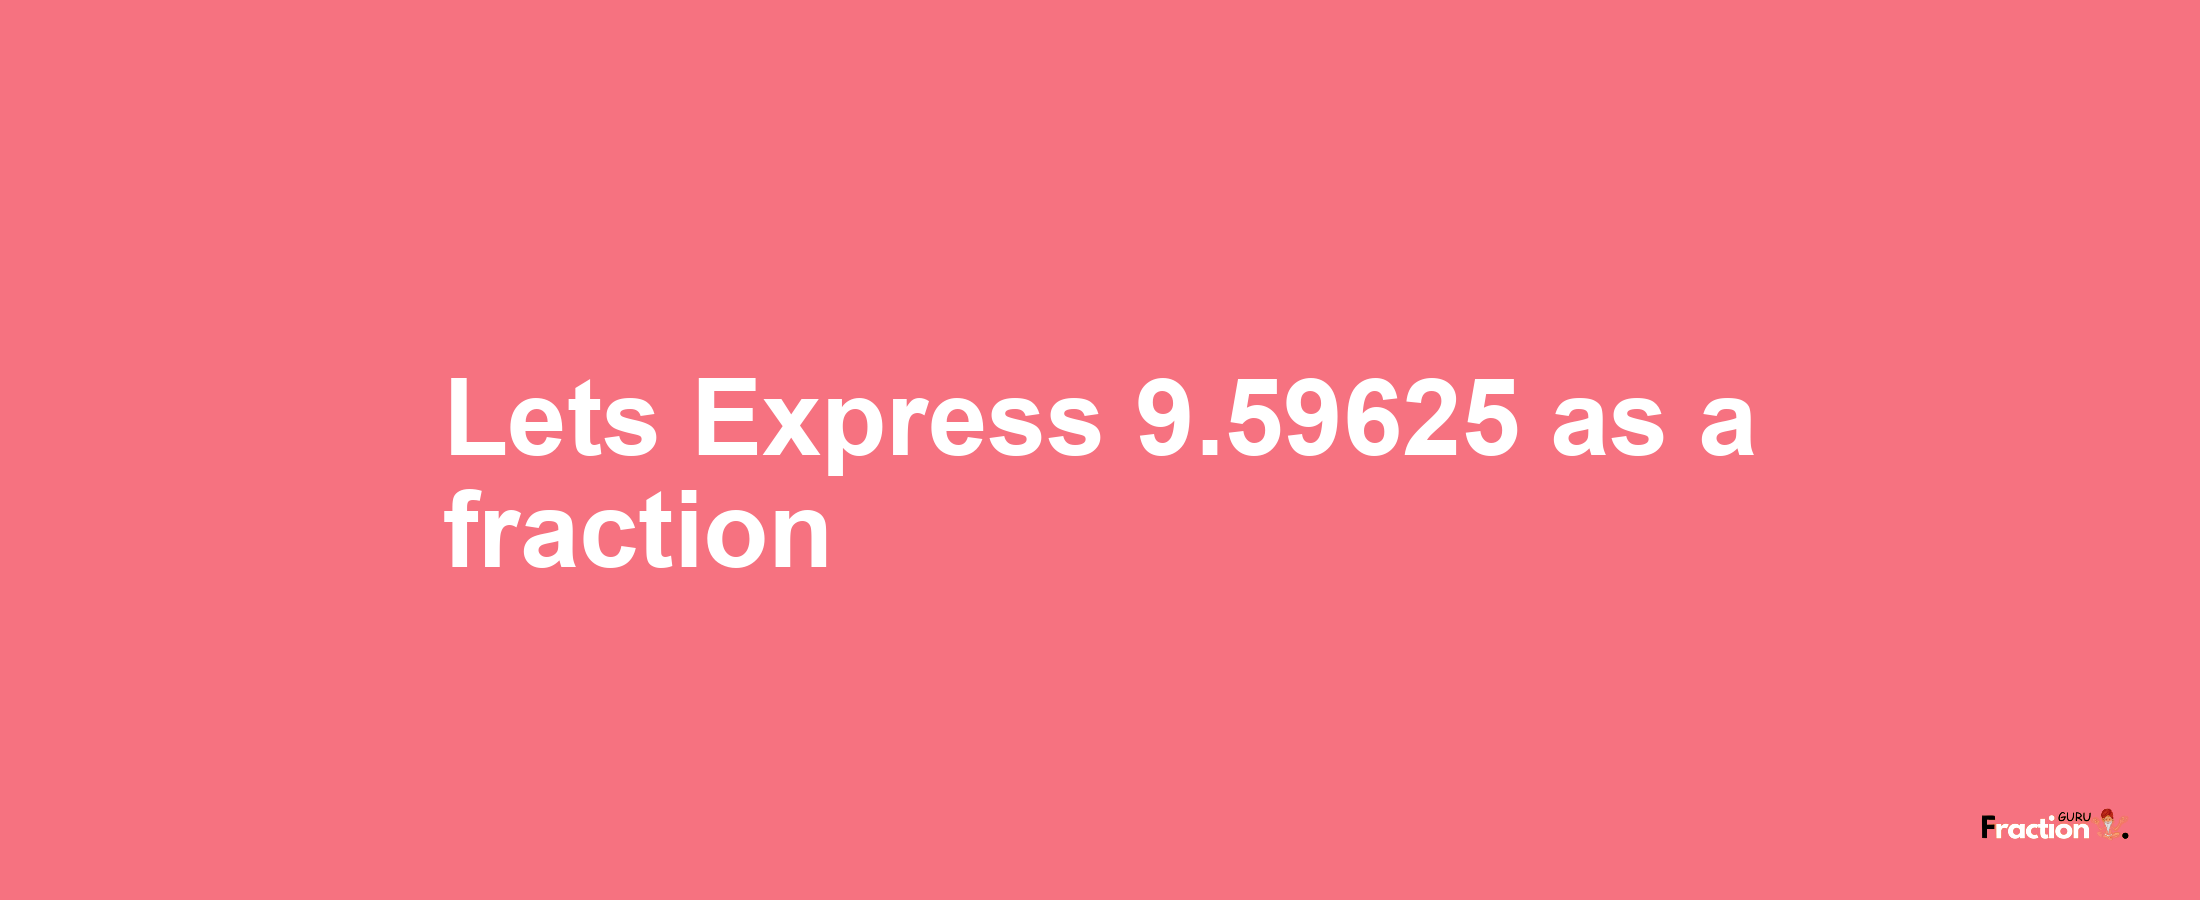 Lets Express 9.59625 as afraction